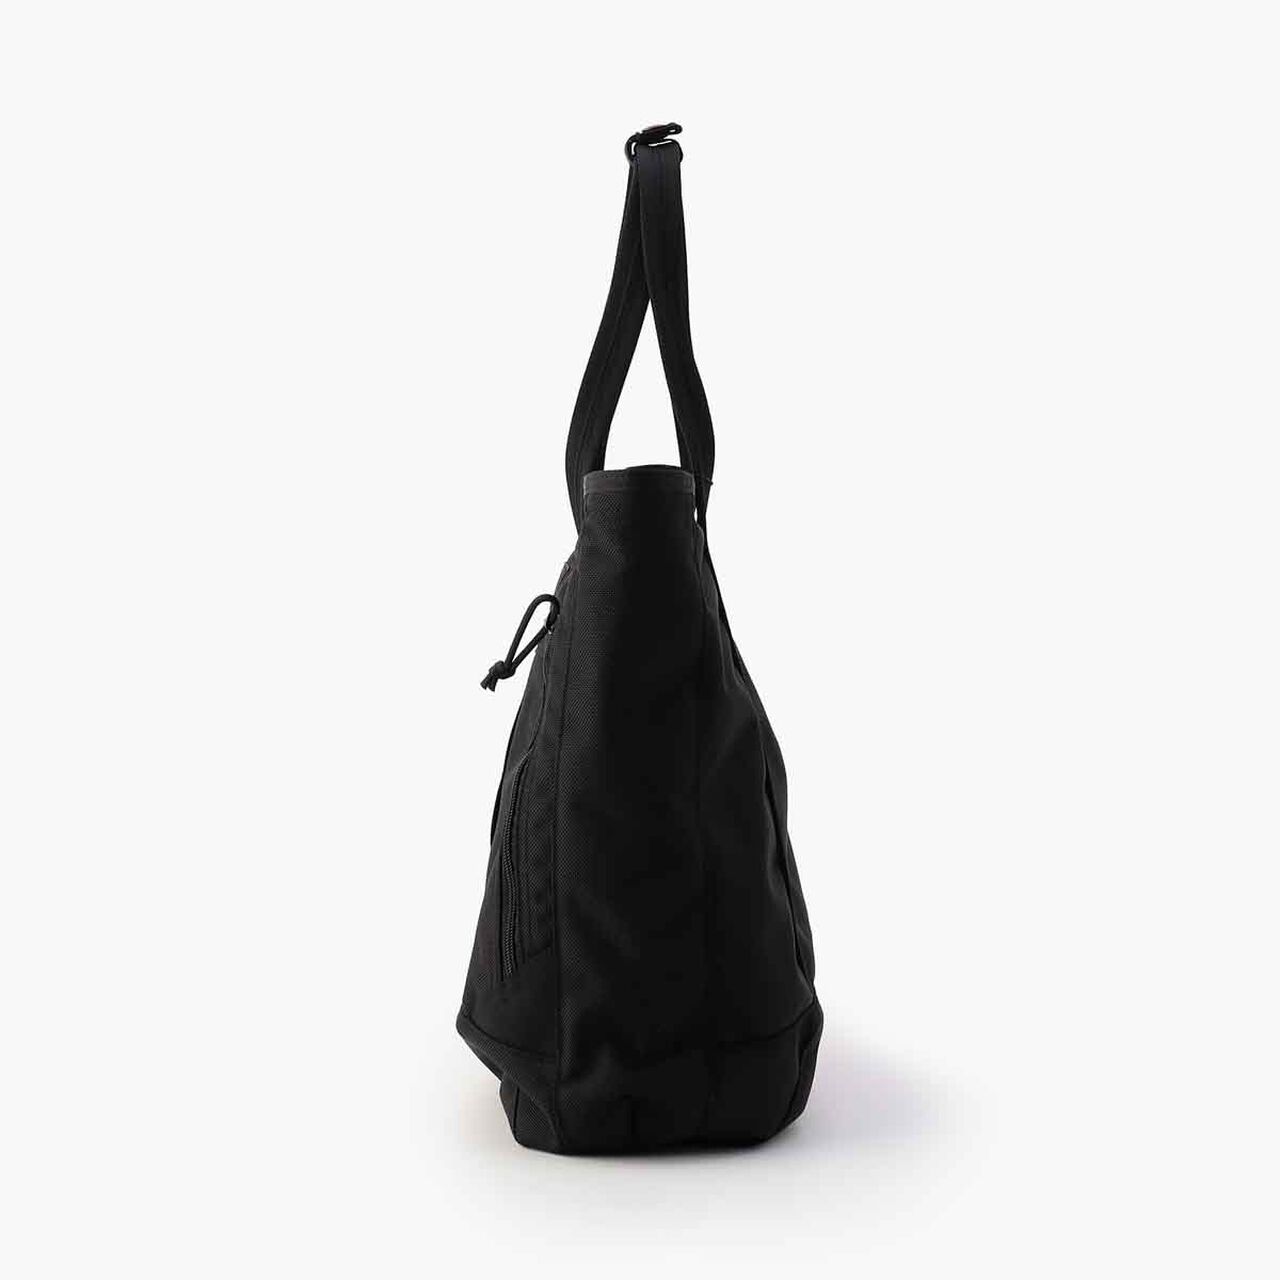 DELTA MASTER TOTE TALL SQD,黑色, large image number 1